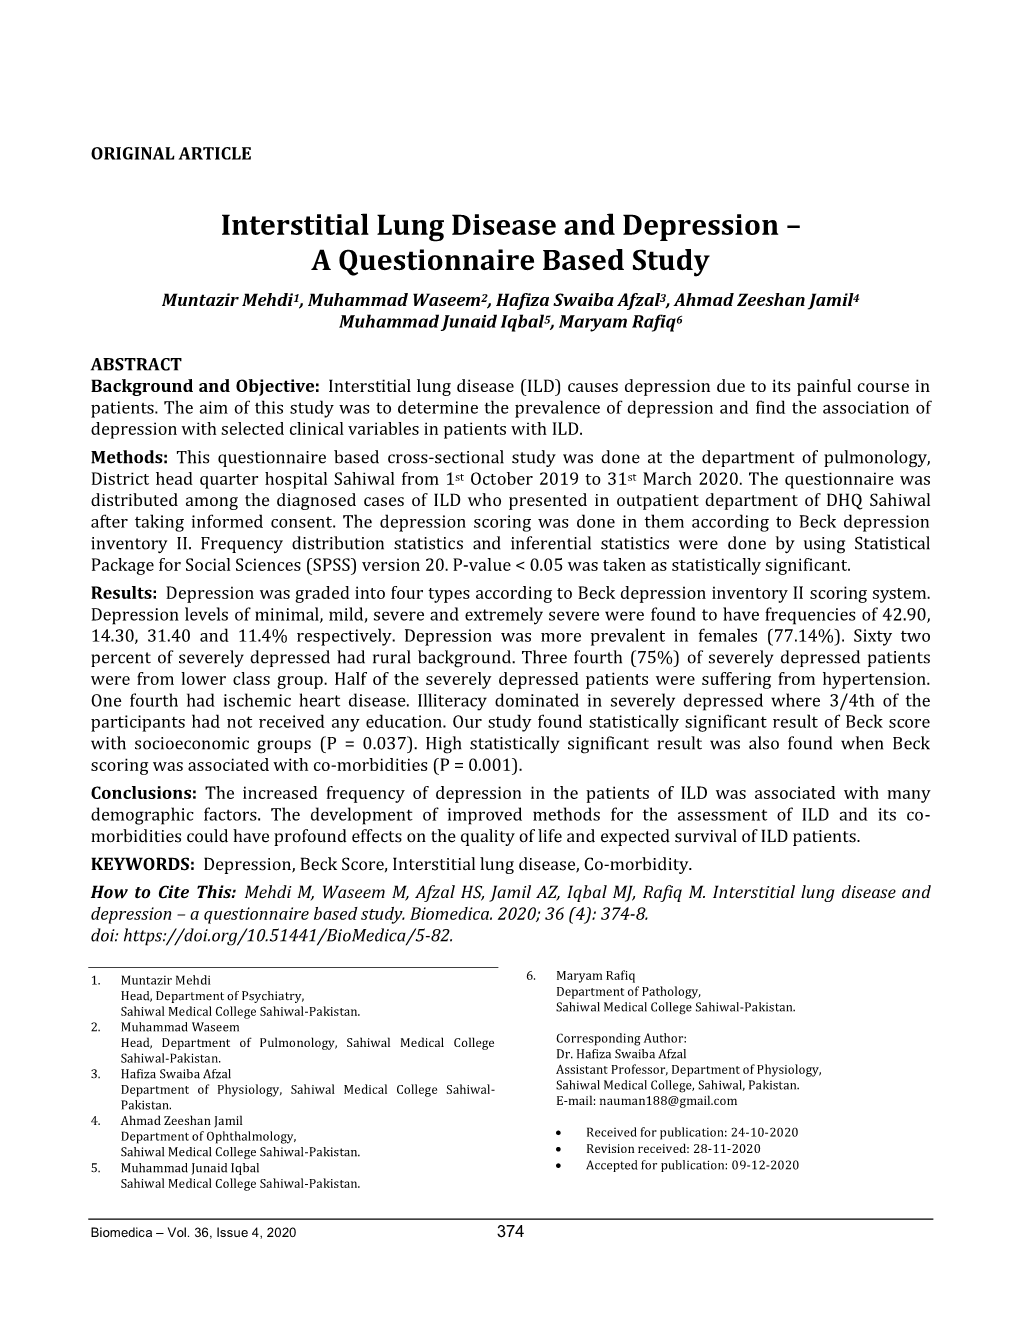 Interstitial Lung Disease and Depression – a Questionnaire Based Study